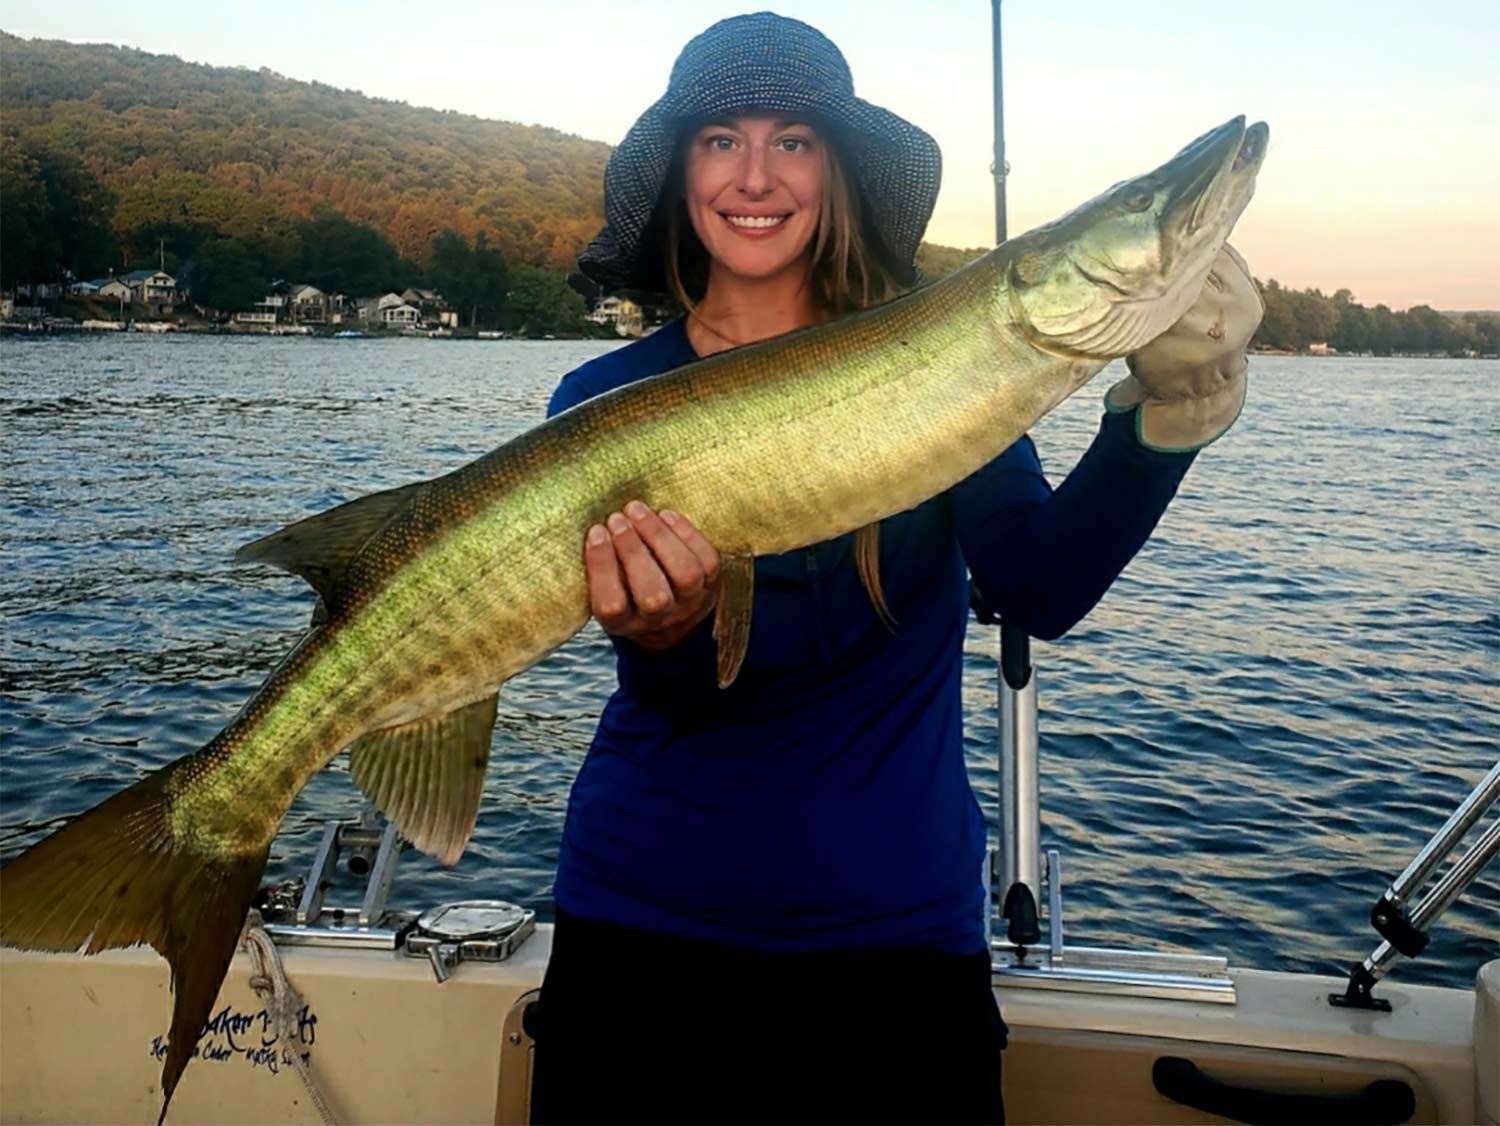 A woman smiles and poses while holding a large muskie fish.